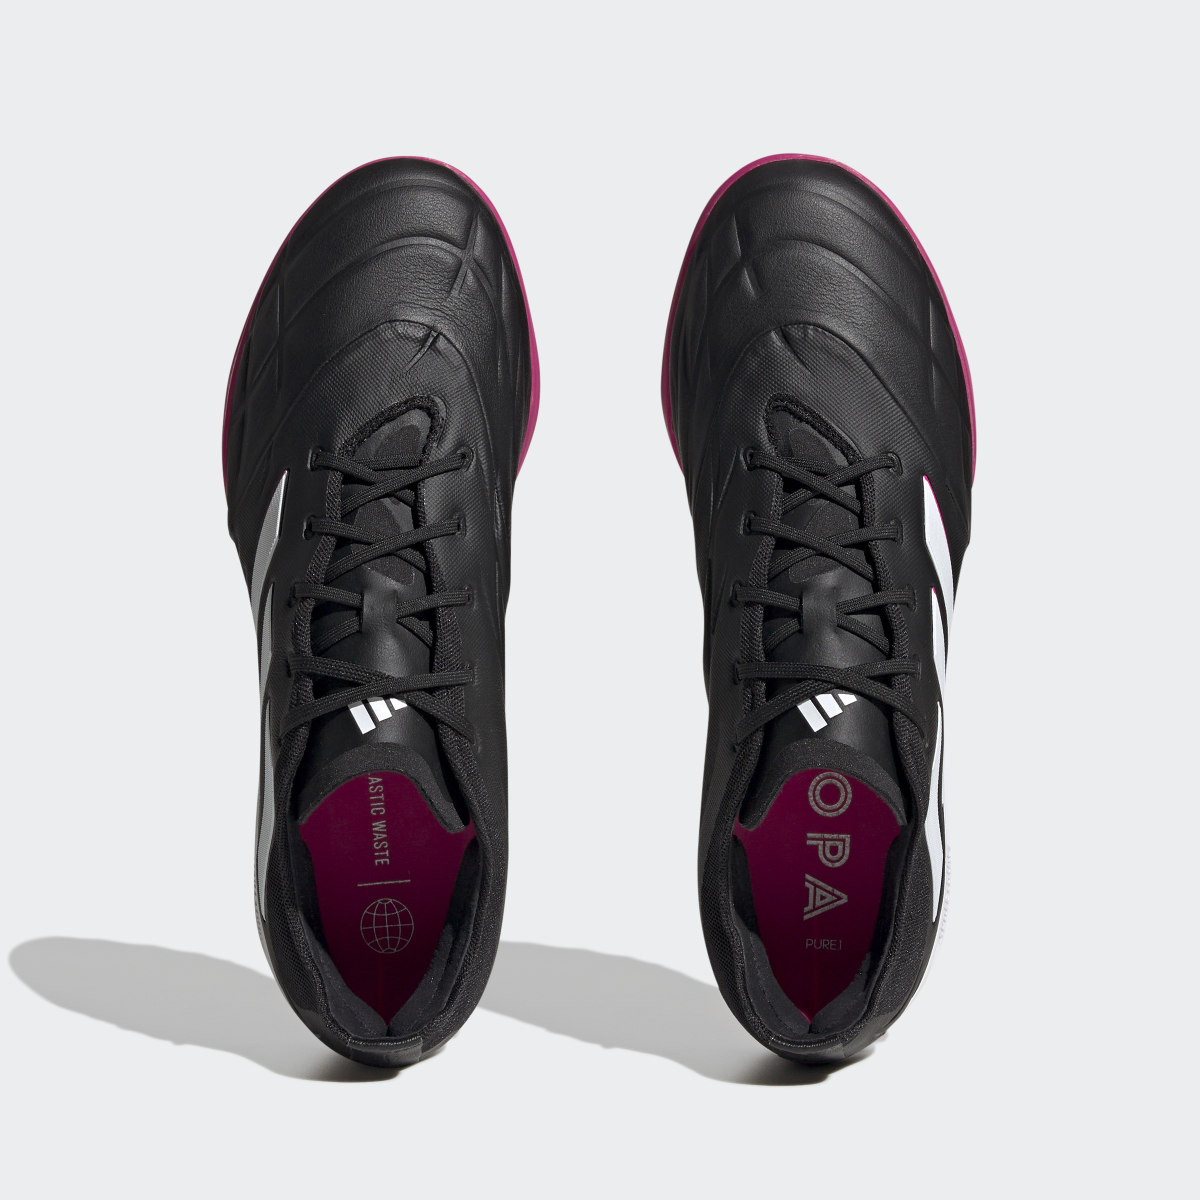 Adidas Copa Pure.1 Turf Boots. 6